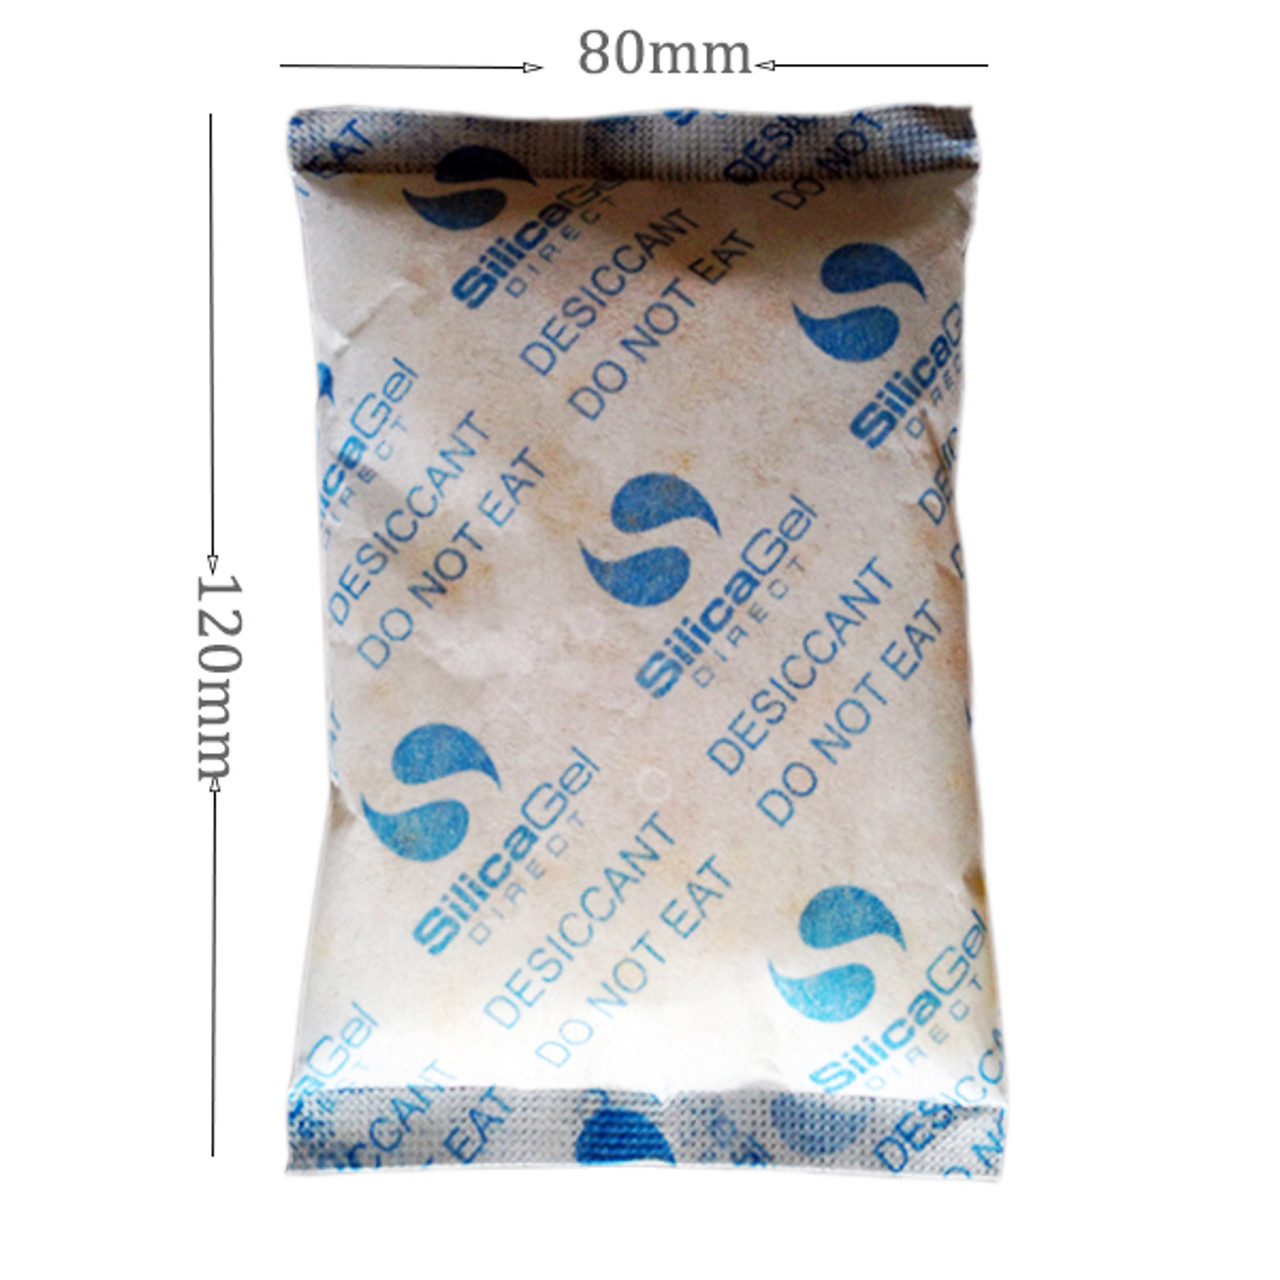 50gm Silica Gel Moisture Absorber Indicating Desiccant Orange/white Packets